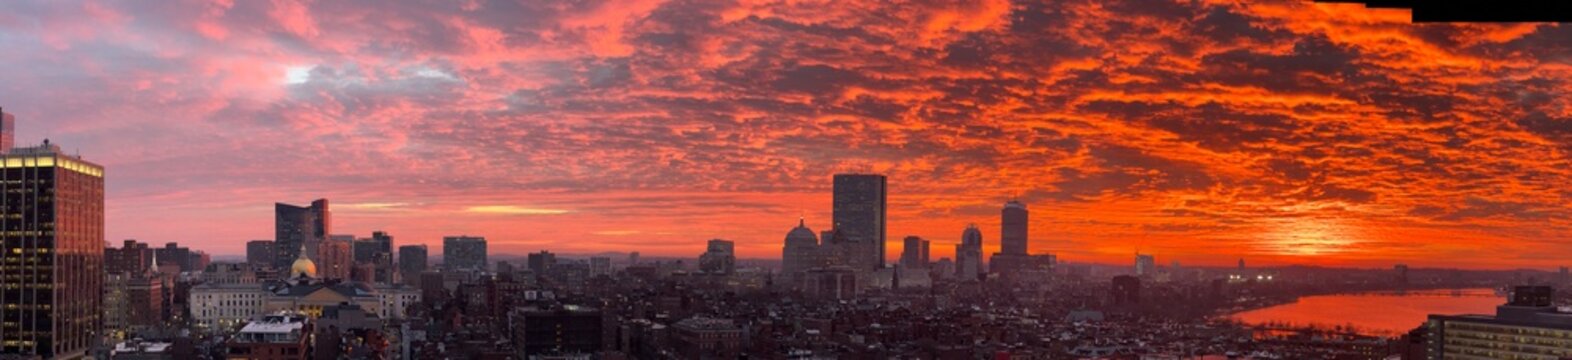 Boston skyline sunset panorama from West End